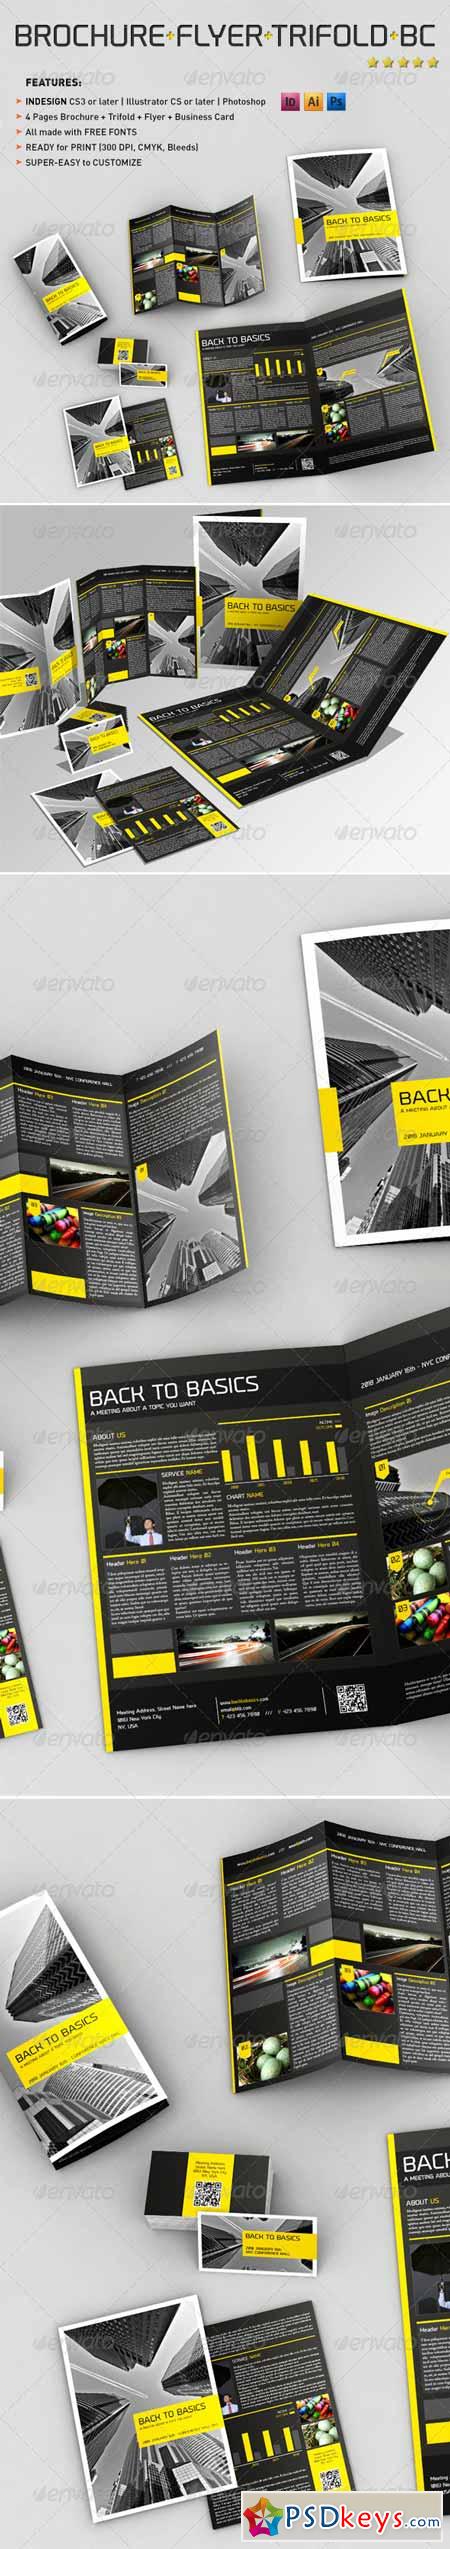 4 Pages Brochure + Trifold + Flyer + Business Card 3744520